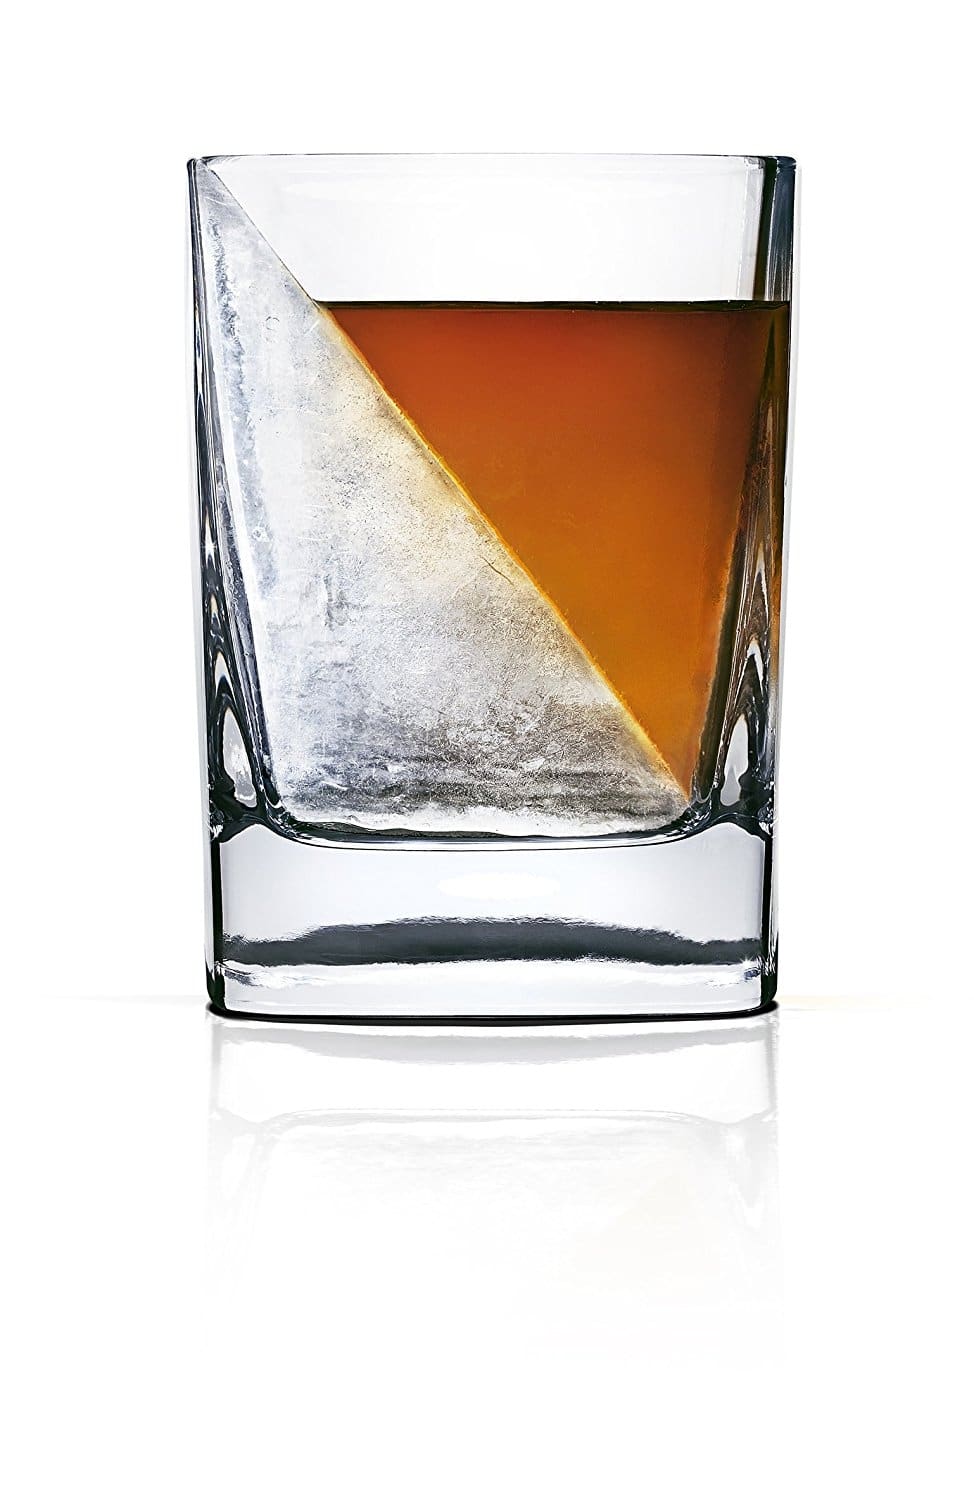 Whiskey Wedge Ice Mould